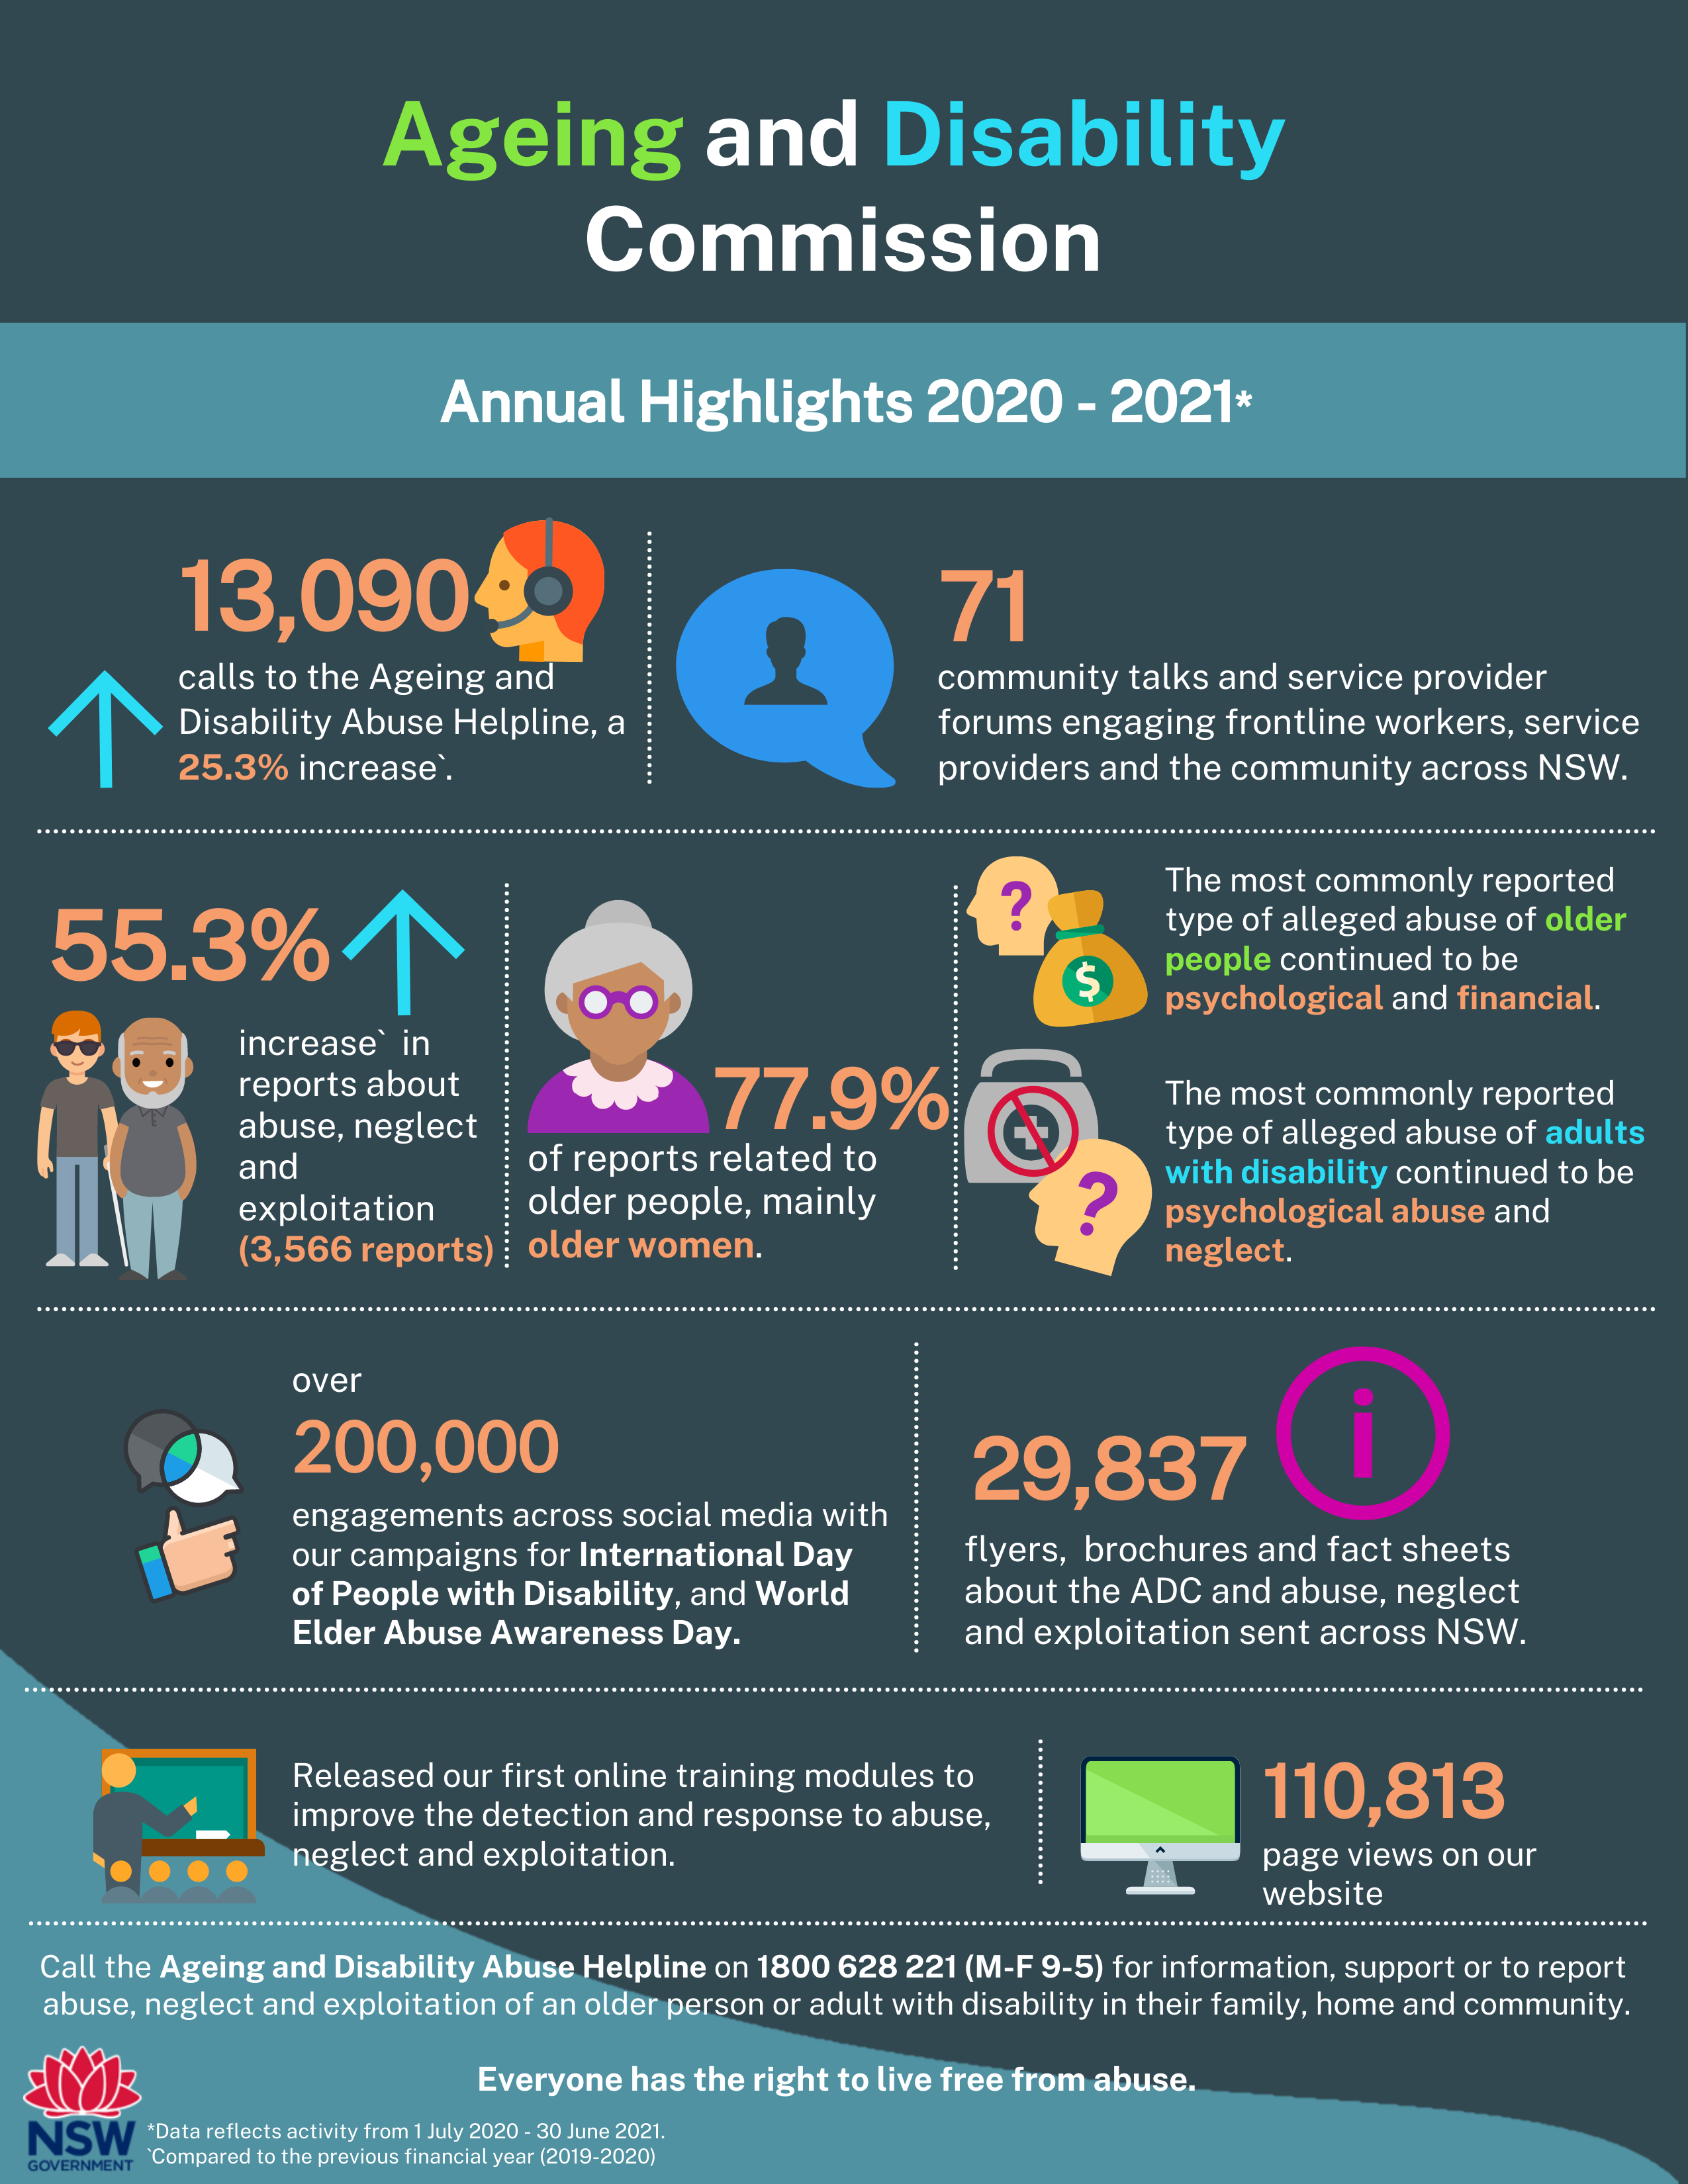 ADC annual highlights infographic for 2020-21. For accessibility issues, please contact ADC office.